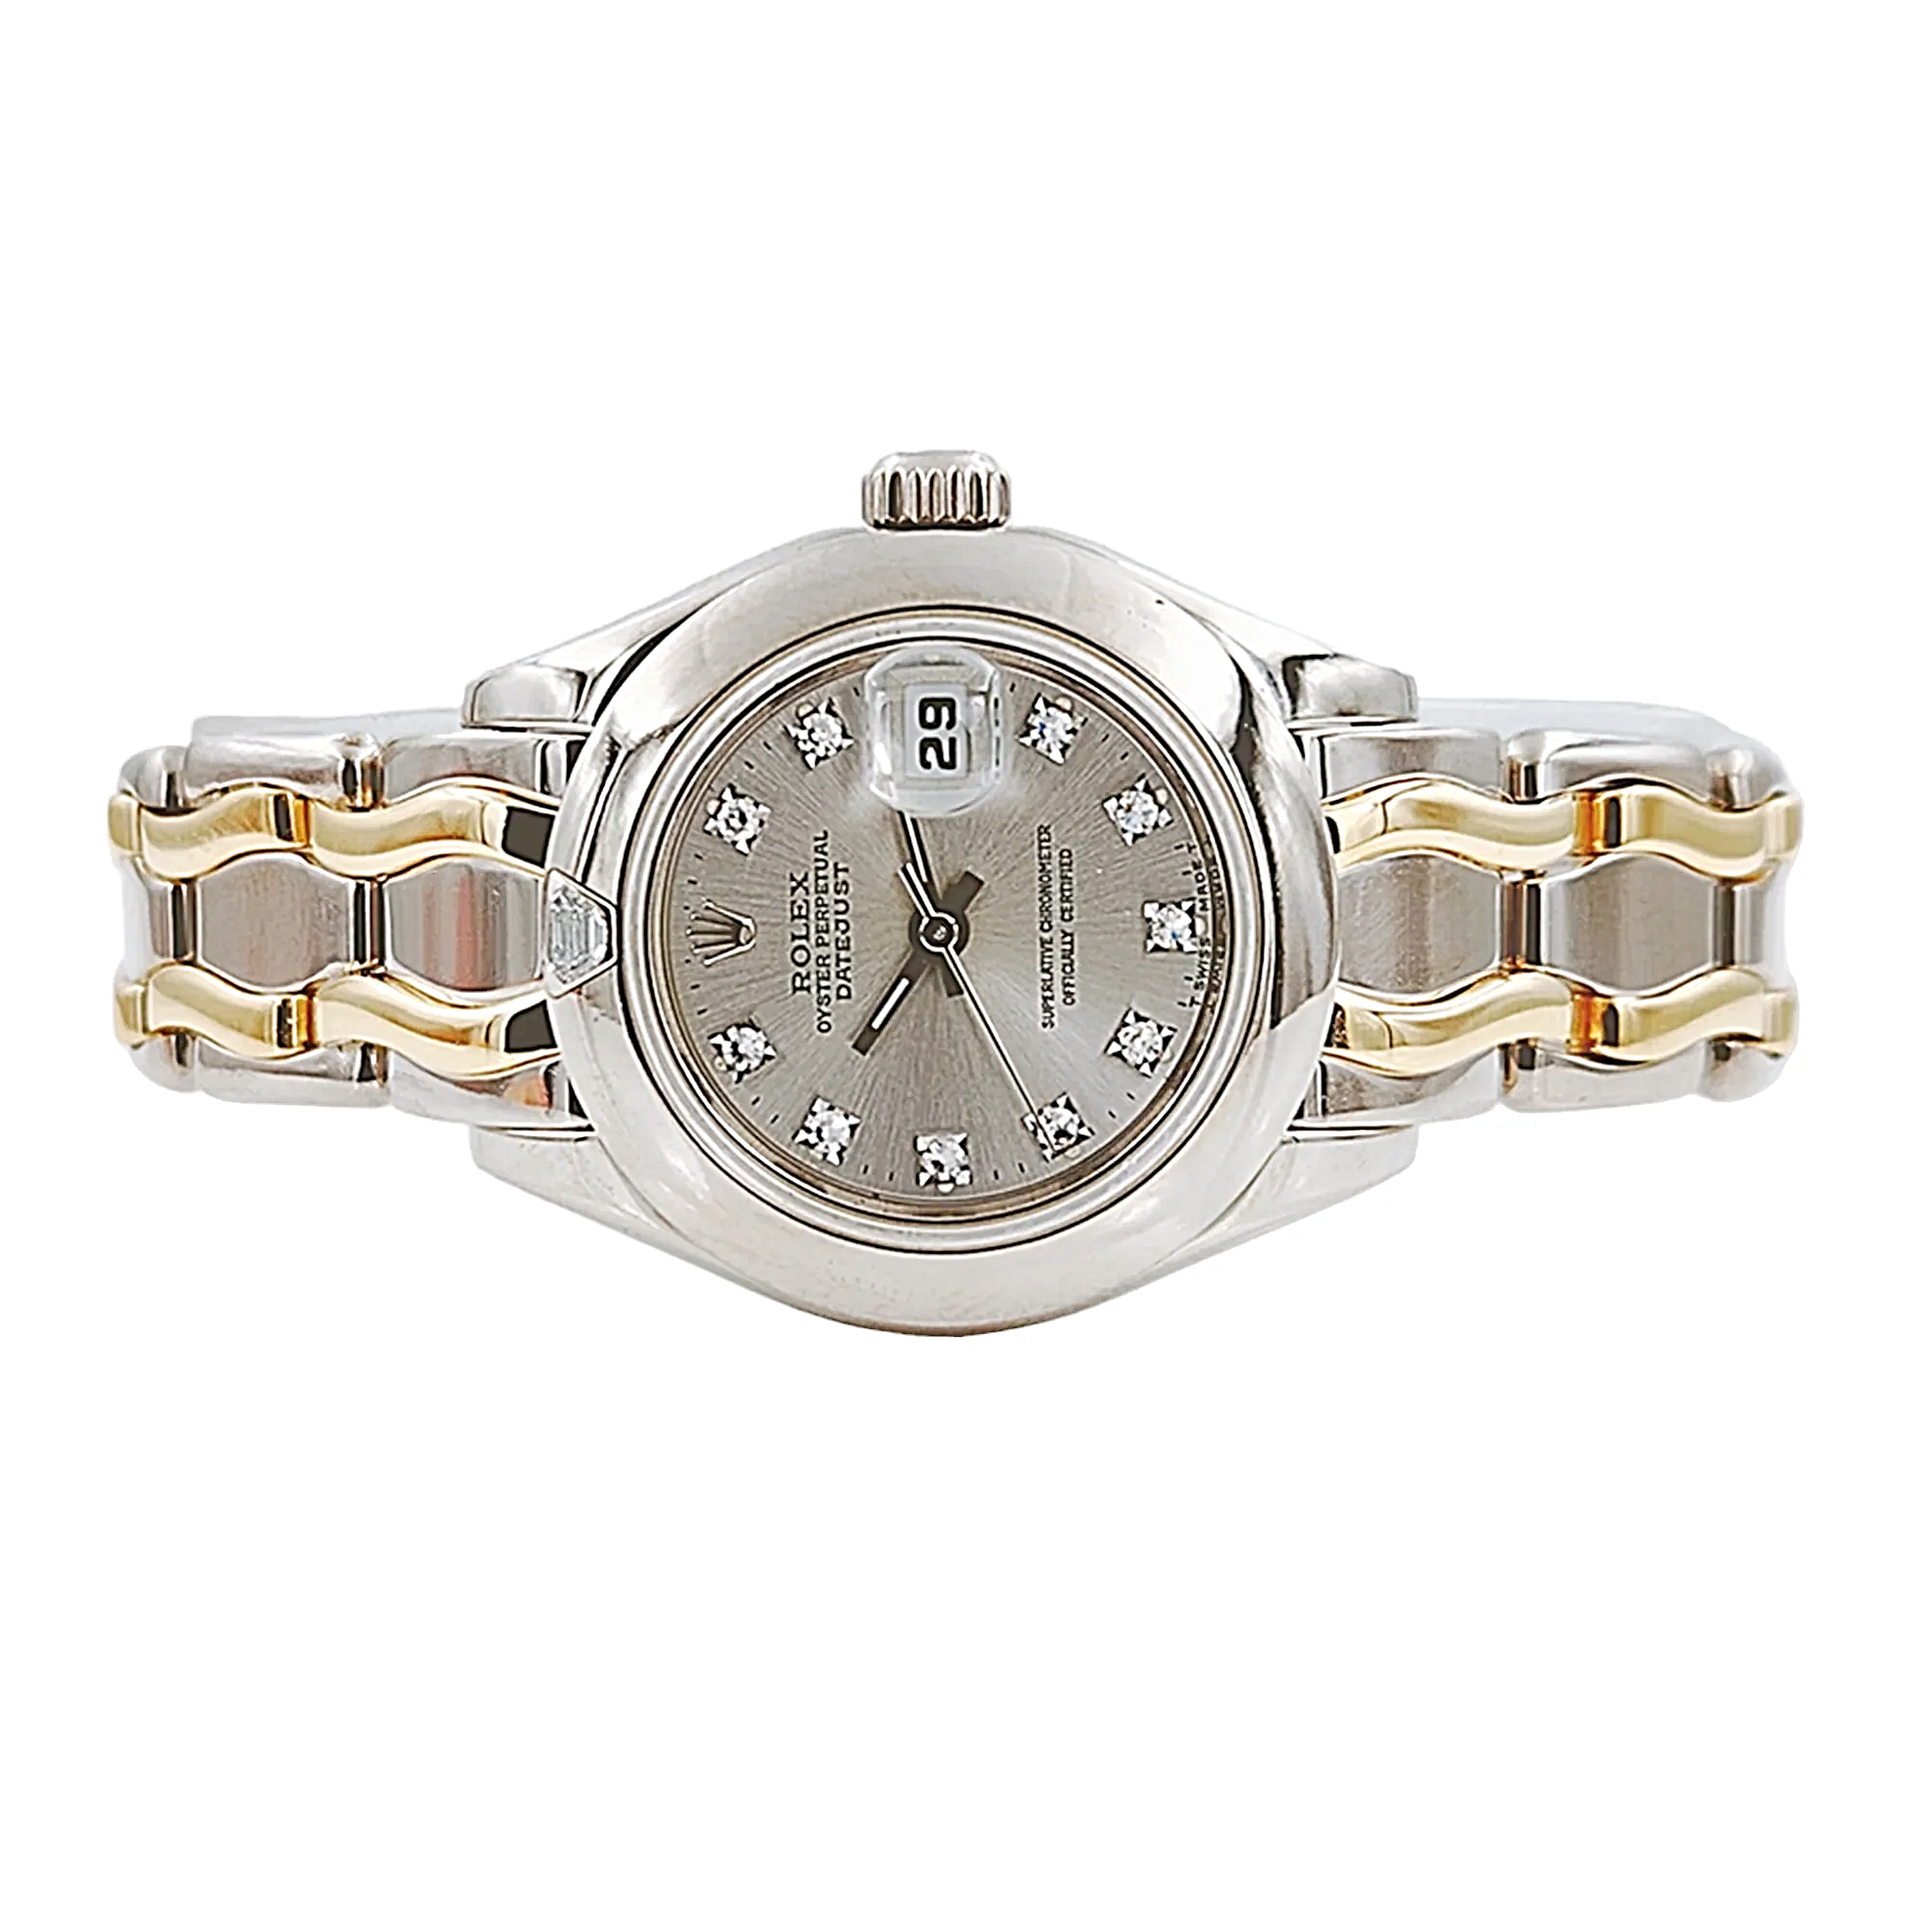 Ladies Rolex 29mm Pearlmaster Two Tone 18K White Gold / 18K Yellow Gold Watch with Silver Diamond Dial and Smooth Bezel. (Pre-Owned 69329)